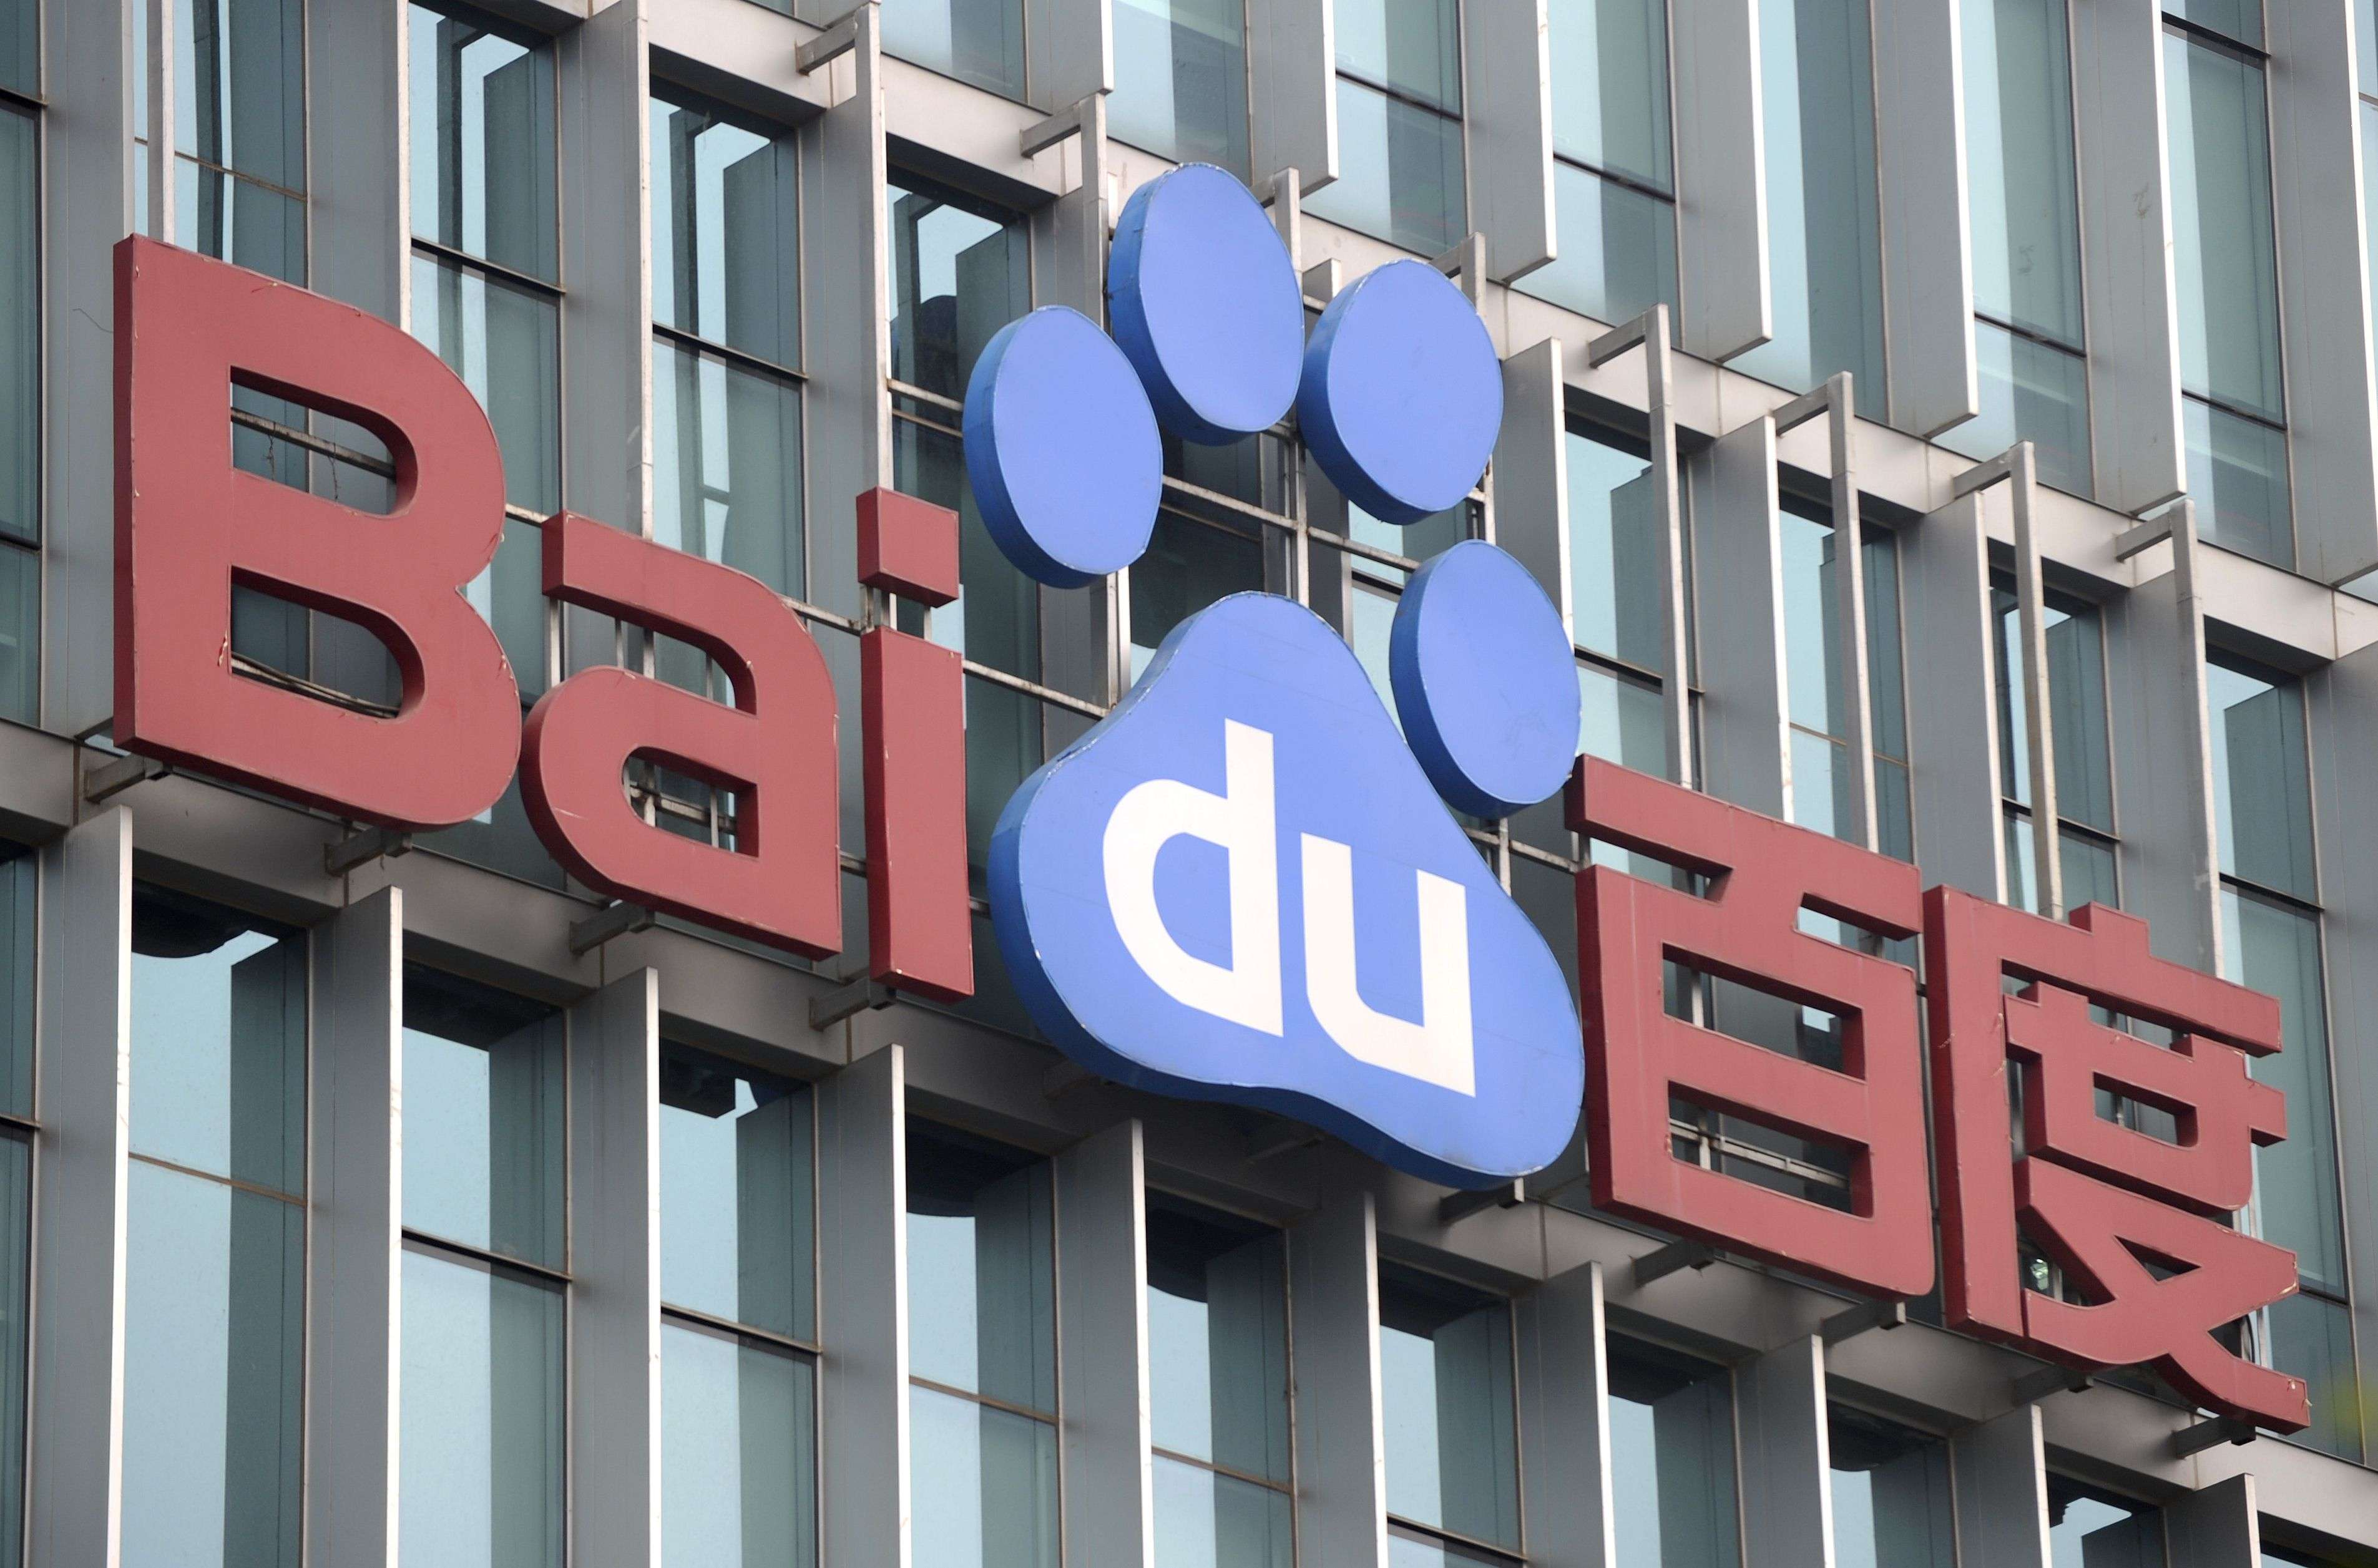 Medicine and health care were among the 10 major top fiveindustries contributing more than 50 per cent ofto Baidu’s total online marketing revenue in 2015. File Photo